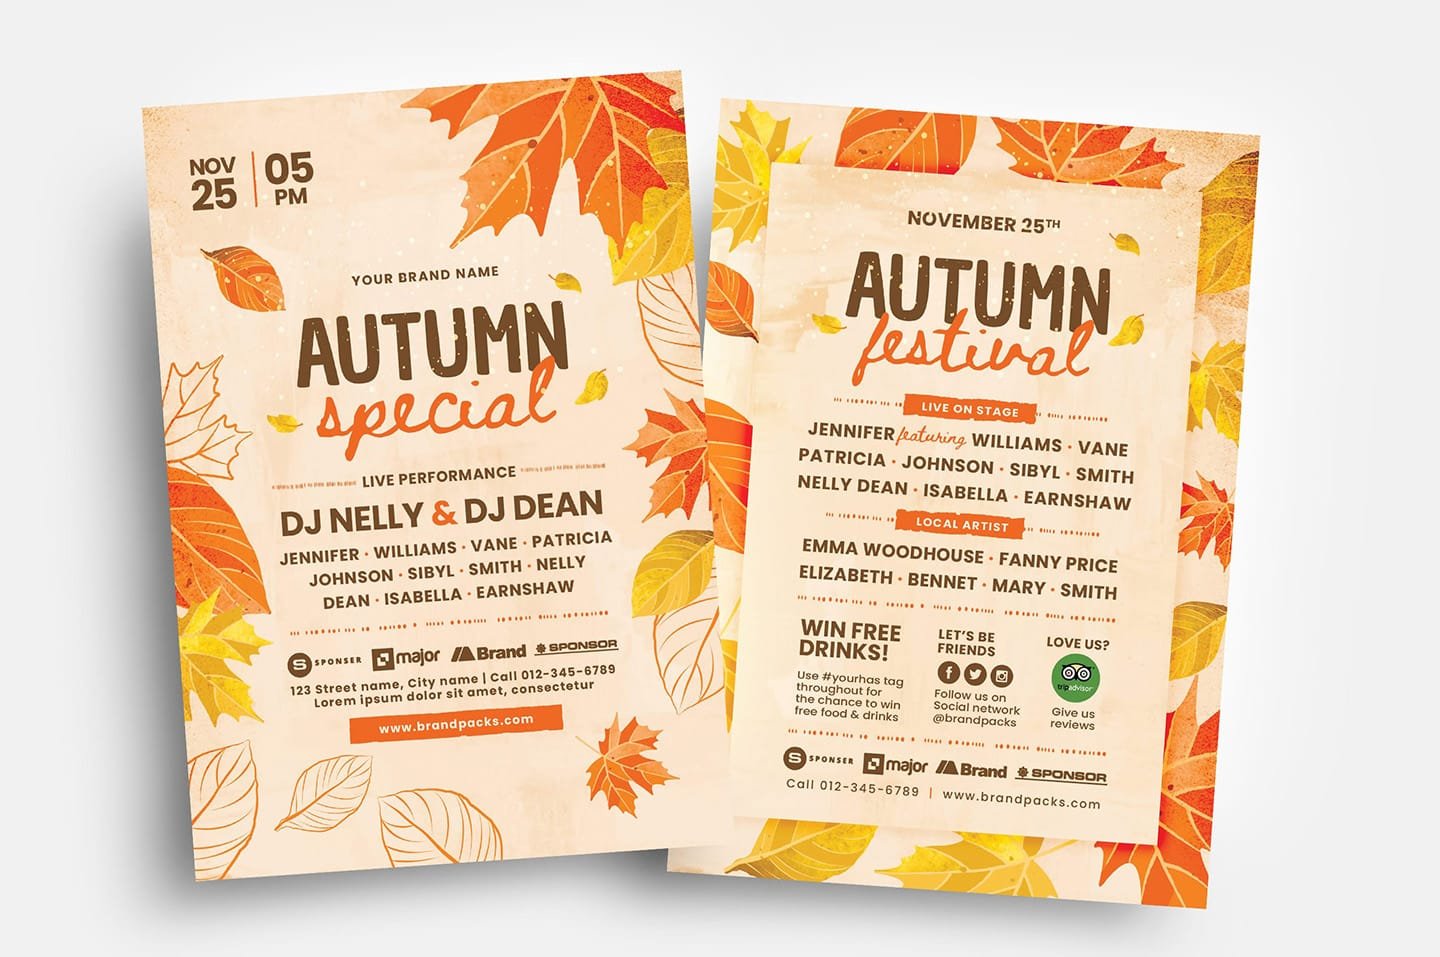 Autumn Fall Flyer Templates cover image.